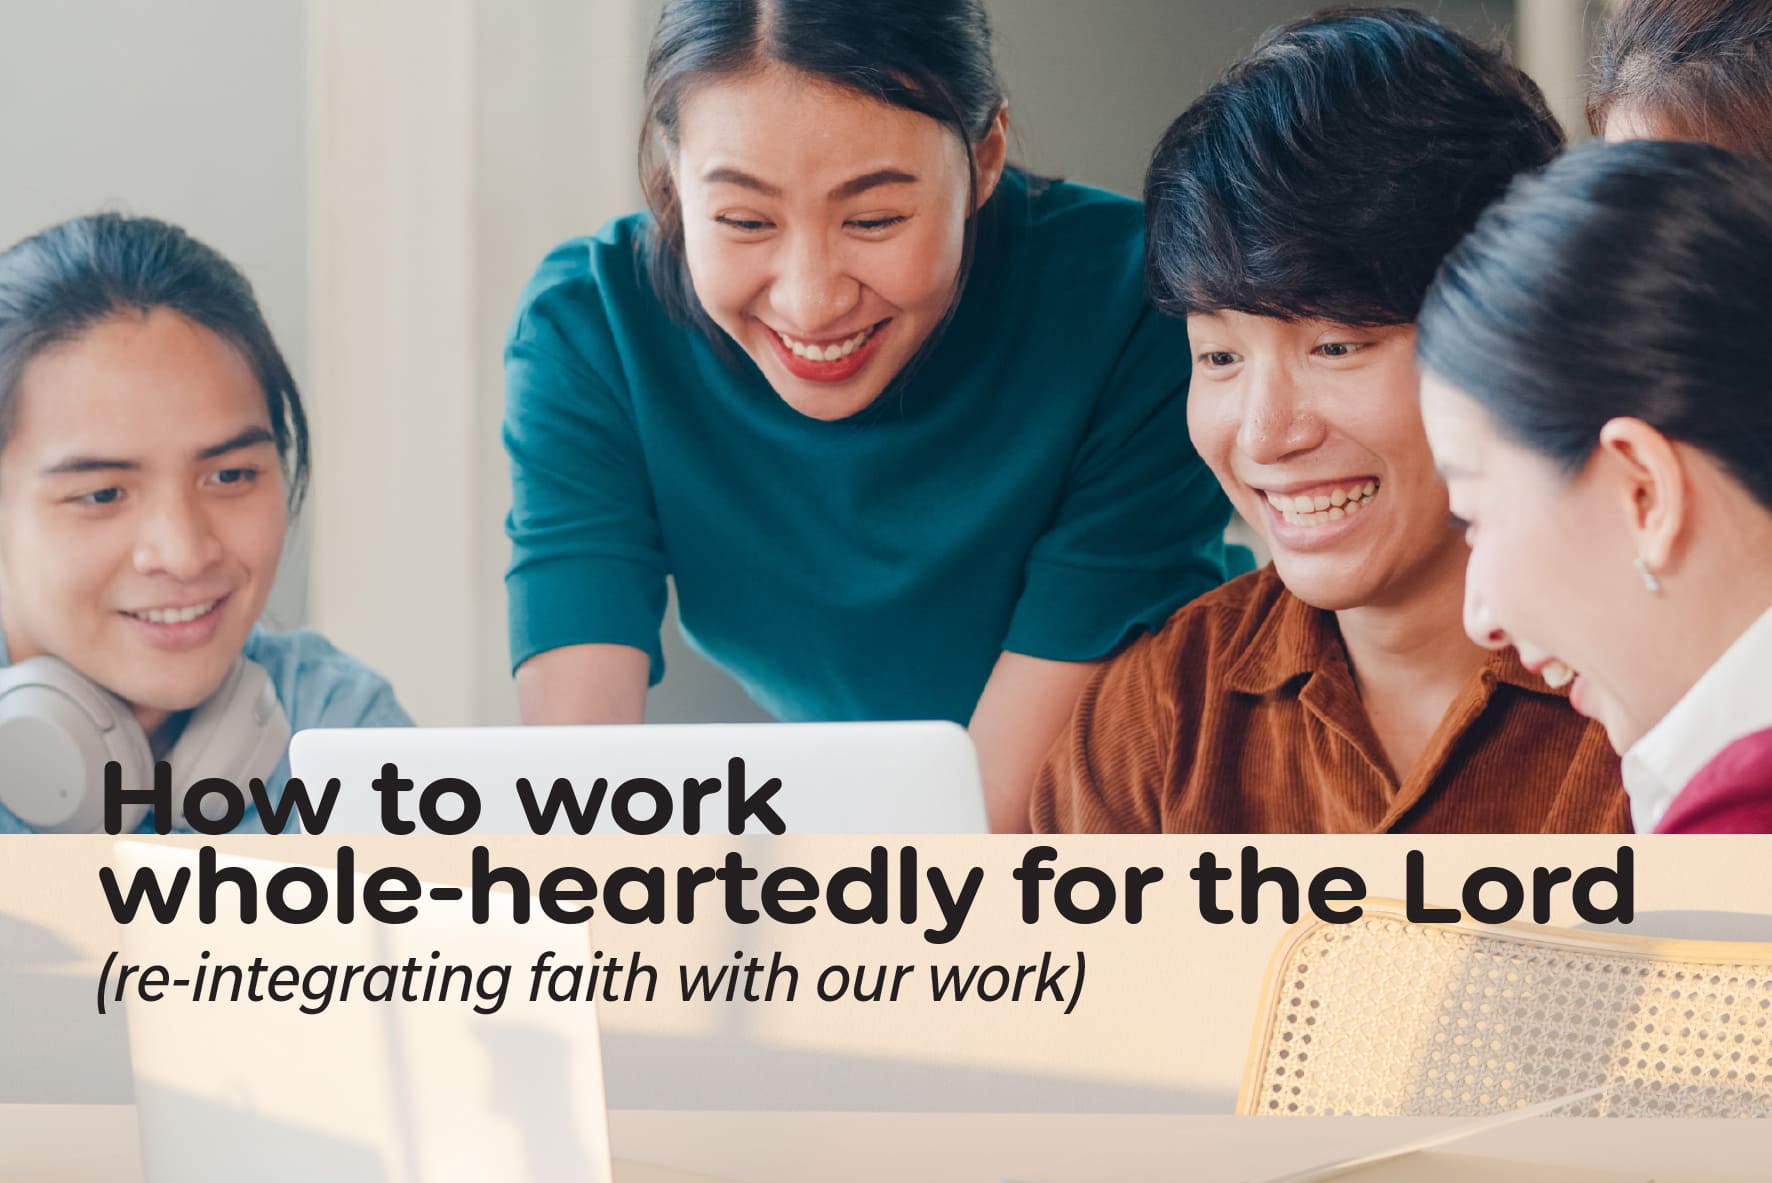 How to work whole-heartedly for the Lord